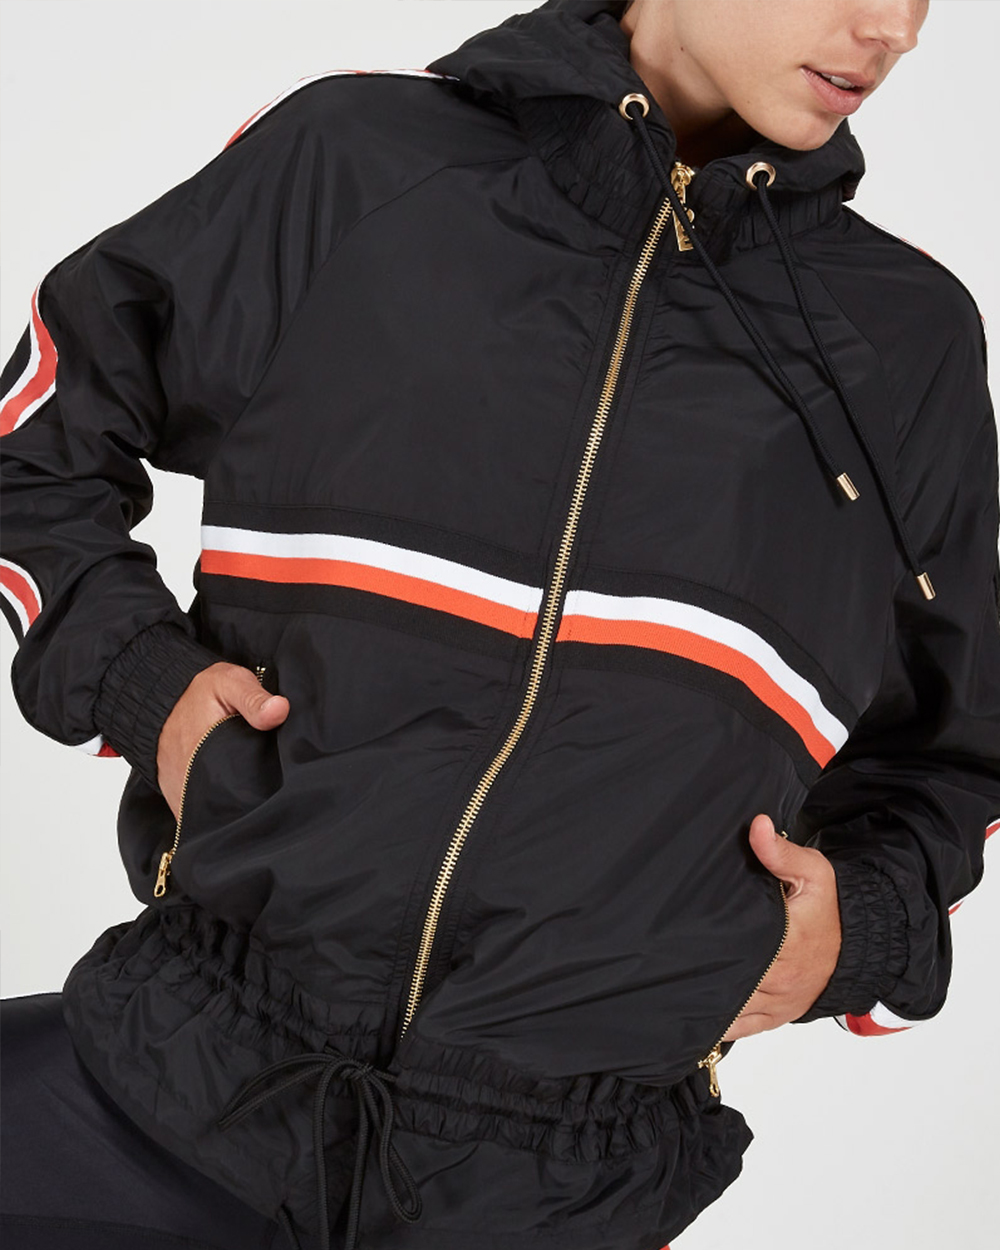 rain jackets to shop right now that’ll get you excited about dreadful weather